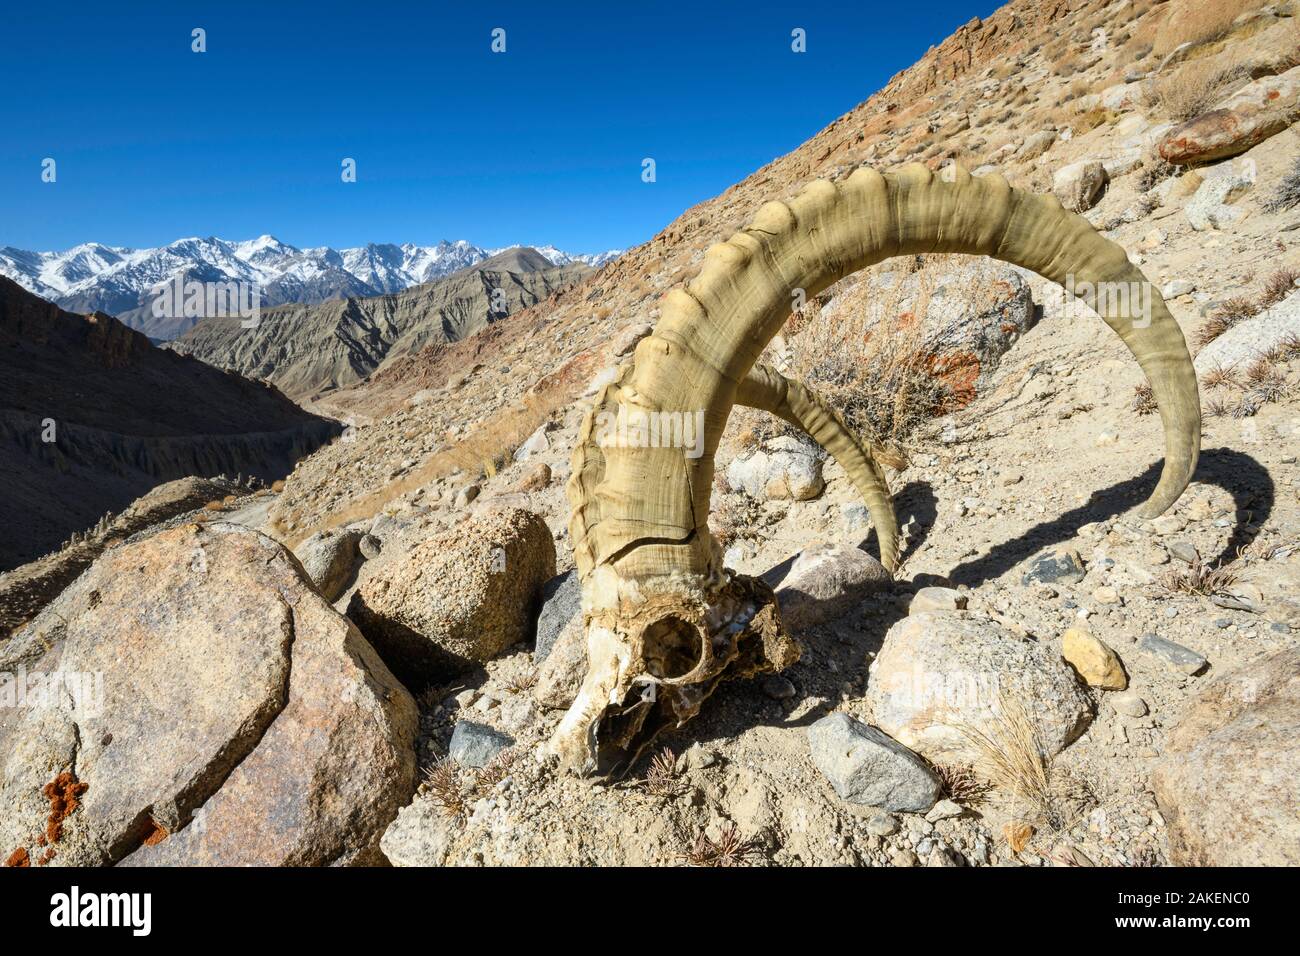 Skull of a male Himalayan ibex (Capra sibirica) killed by a snow leopard, lying on steep rocky slope. Himalayas, Ladakh, northern India. Stock Photo